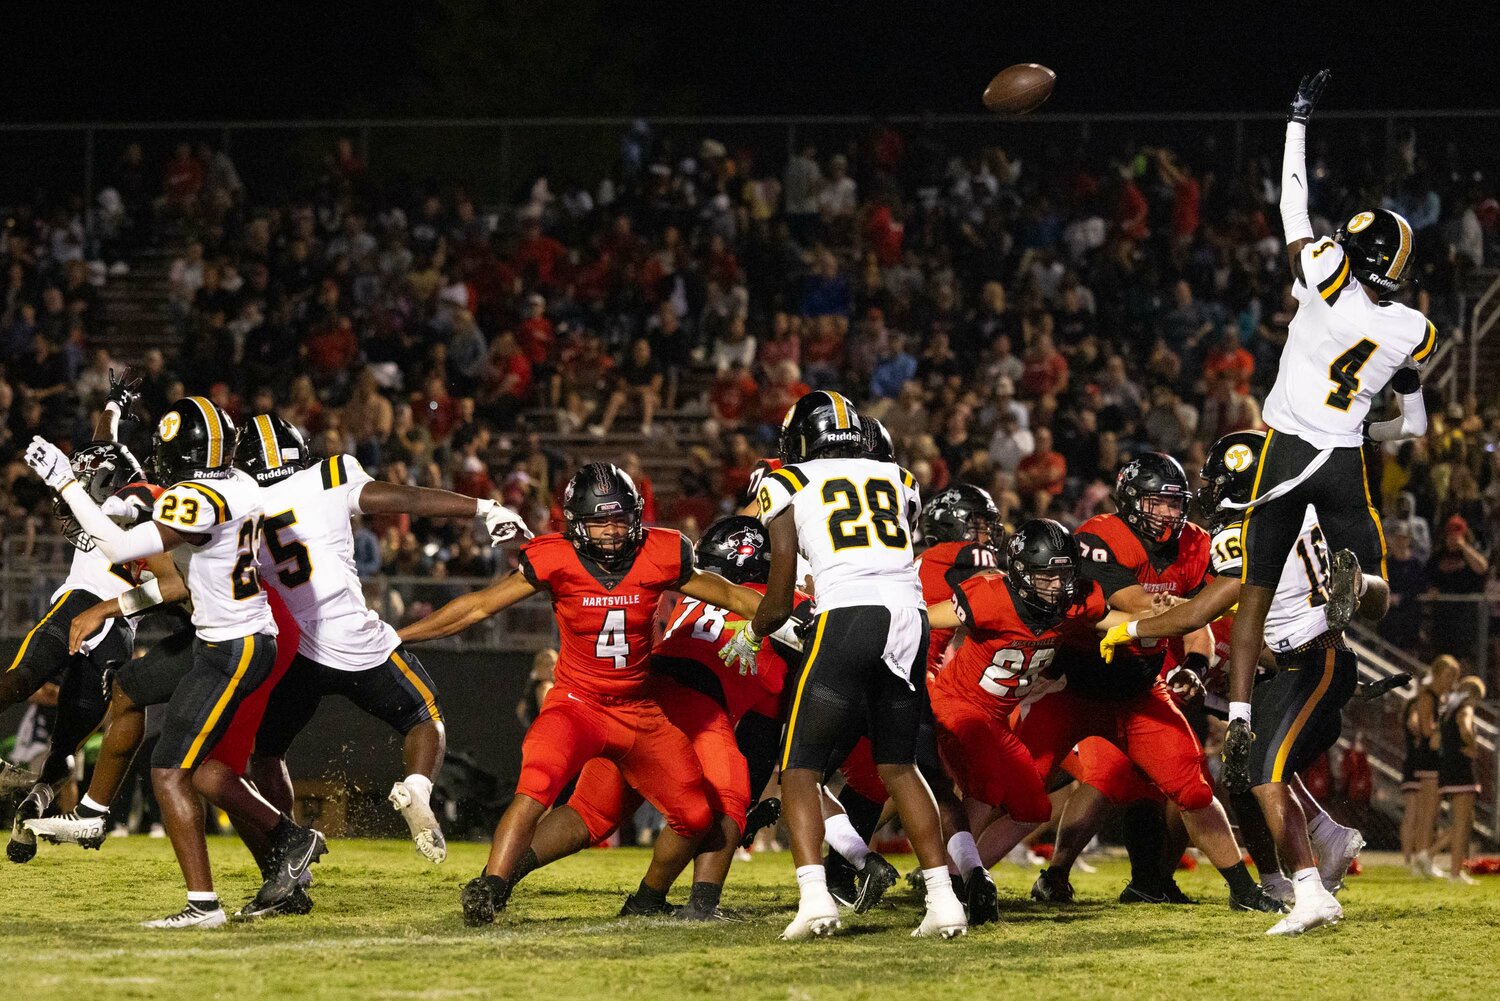 The Yellow Jackets attempt to block a punt in the third quarter.